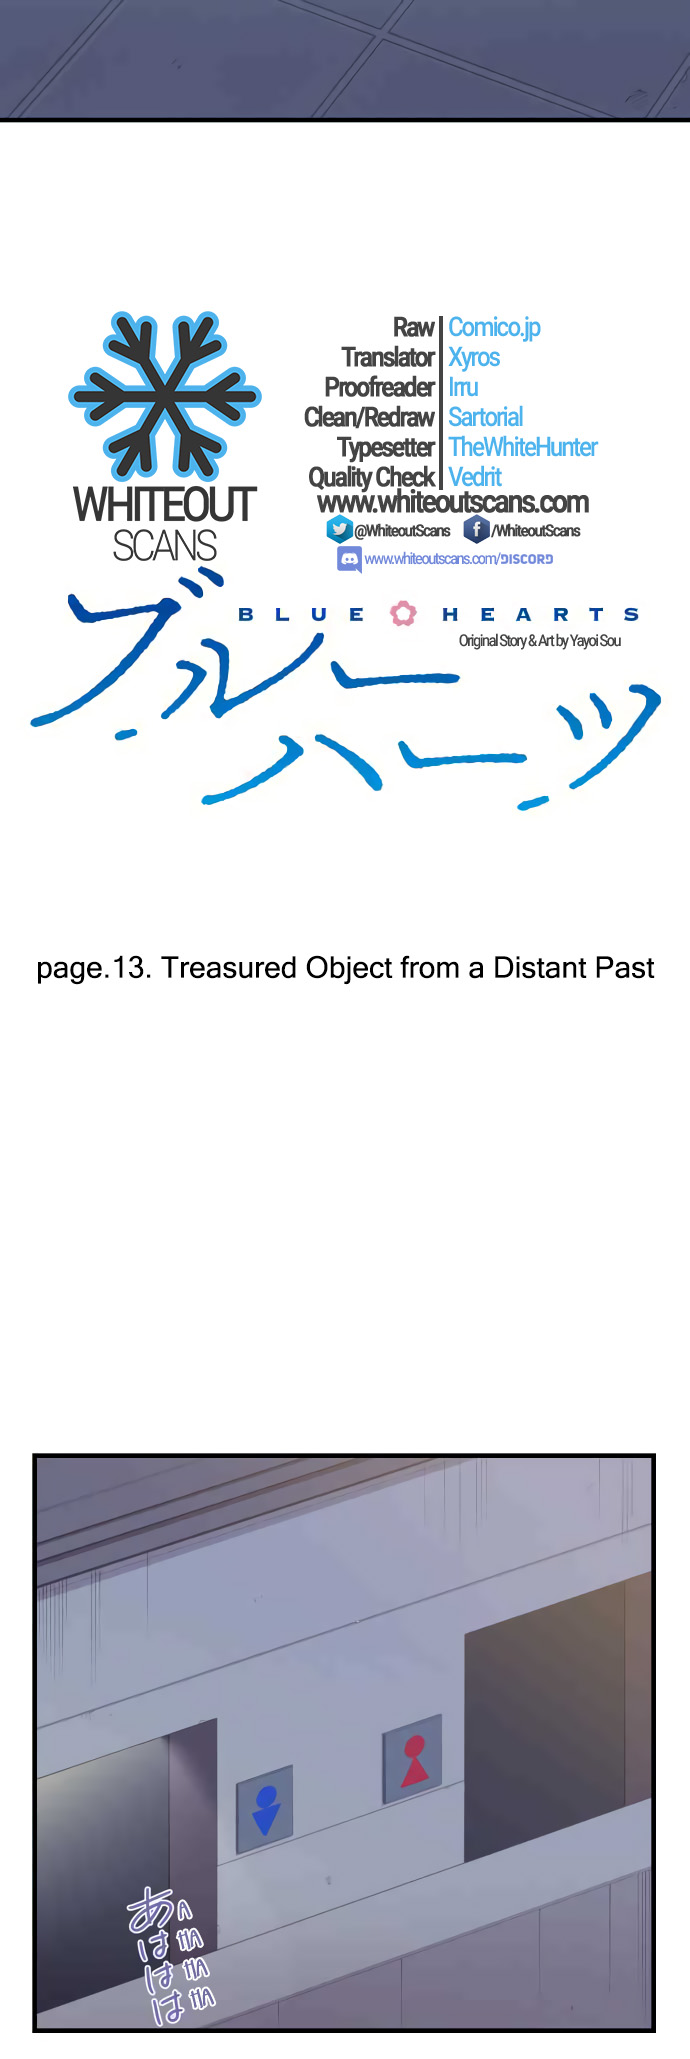 Blue Hearts Ch. 13 Treasured Object from a Distant Past